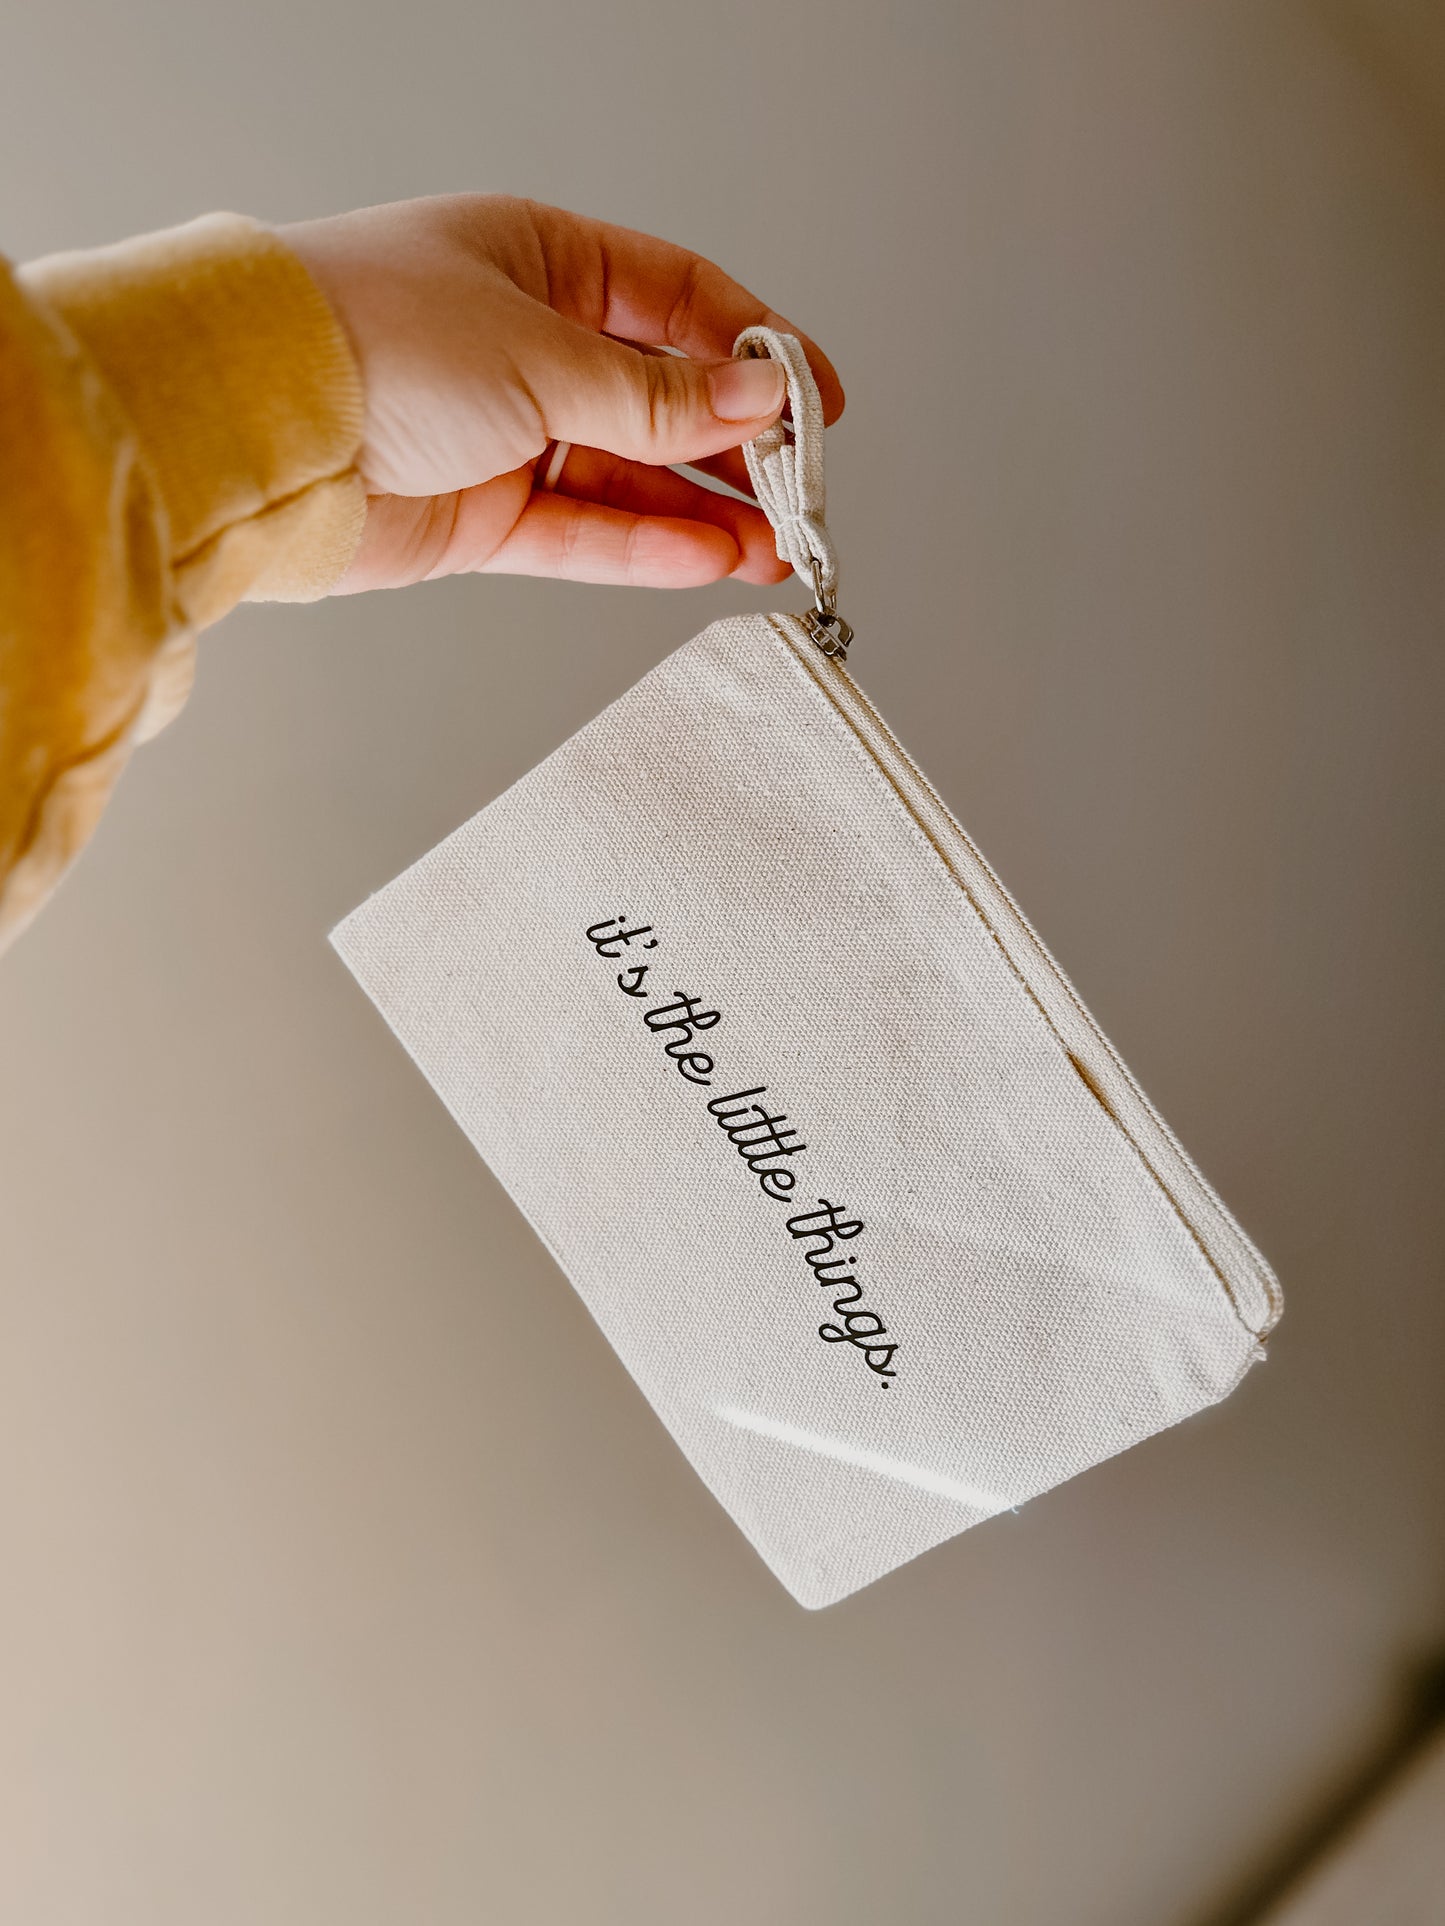 Little Things Pouch